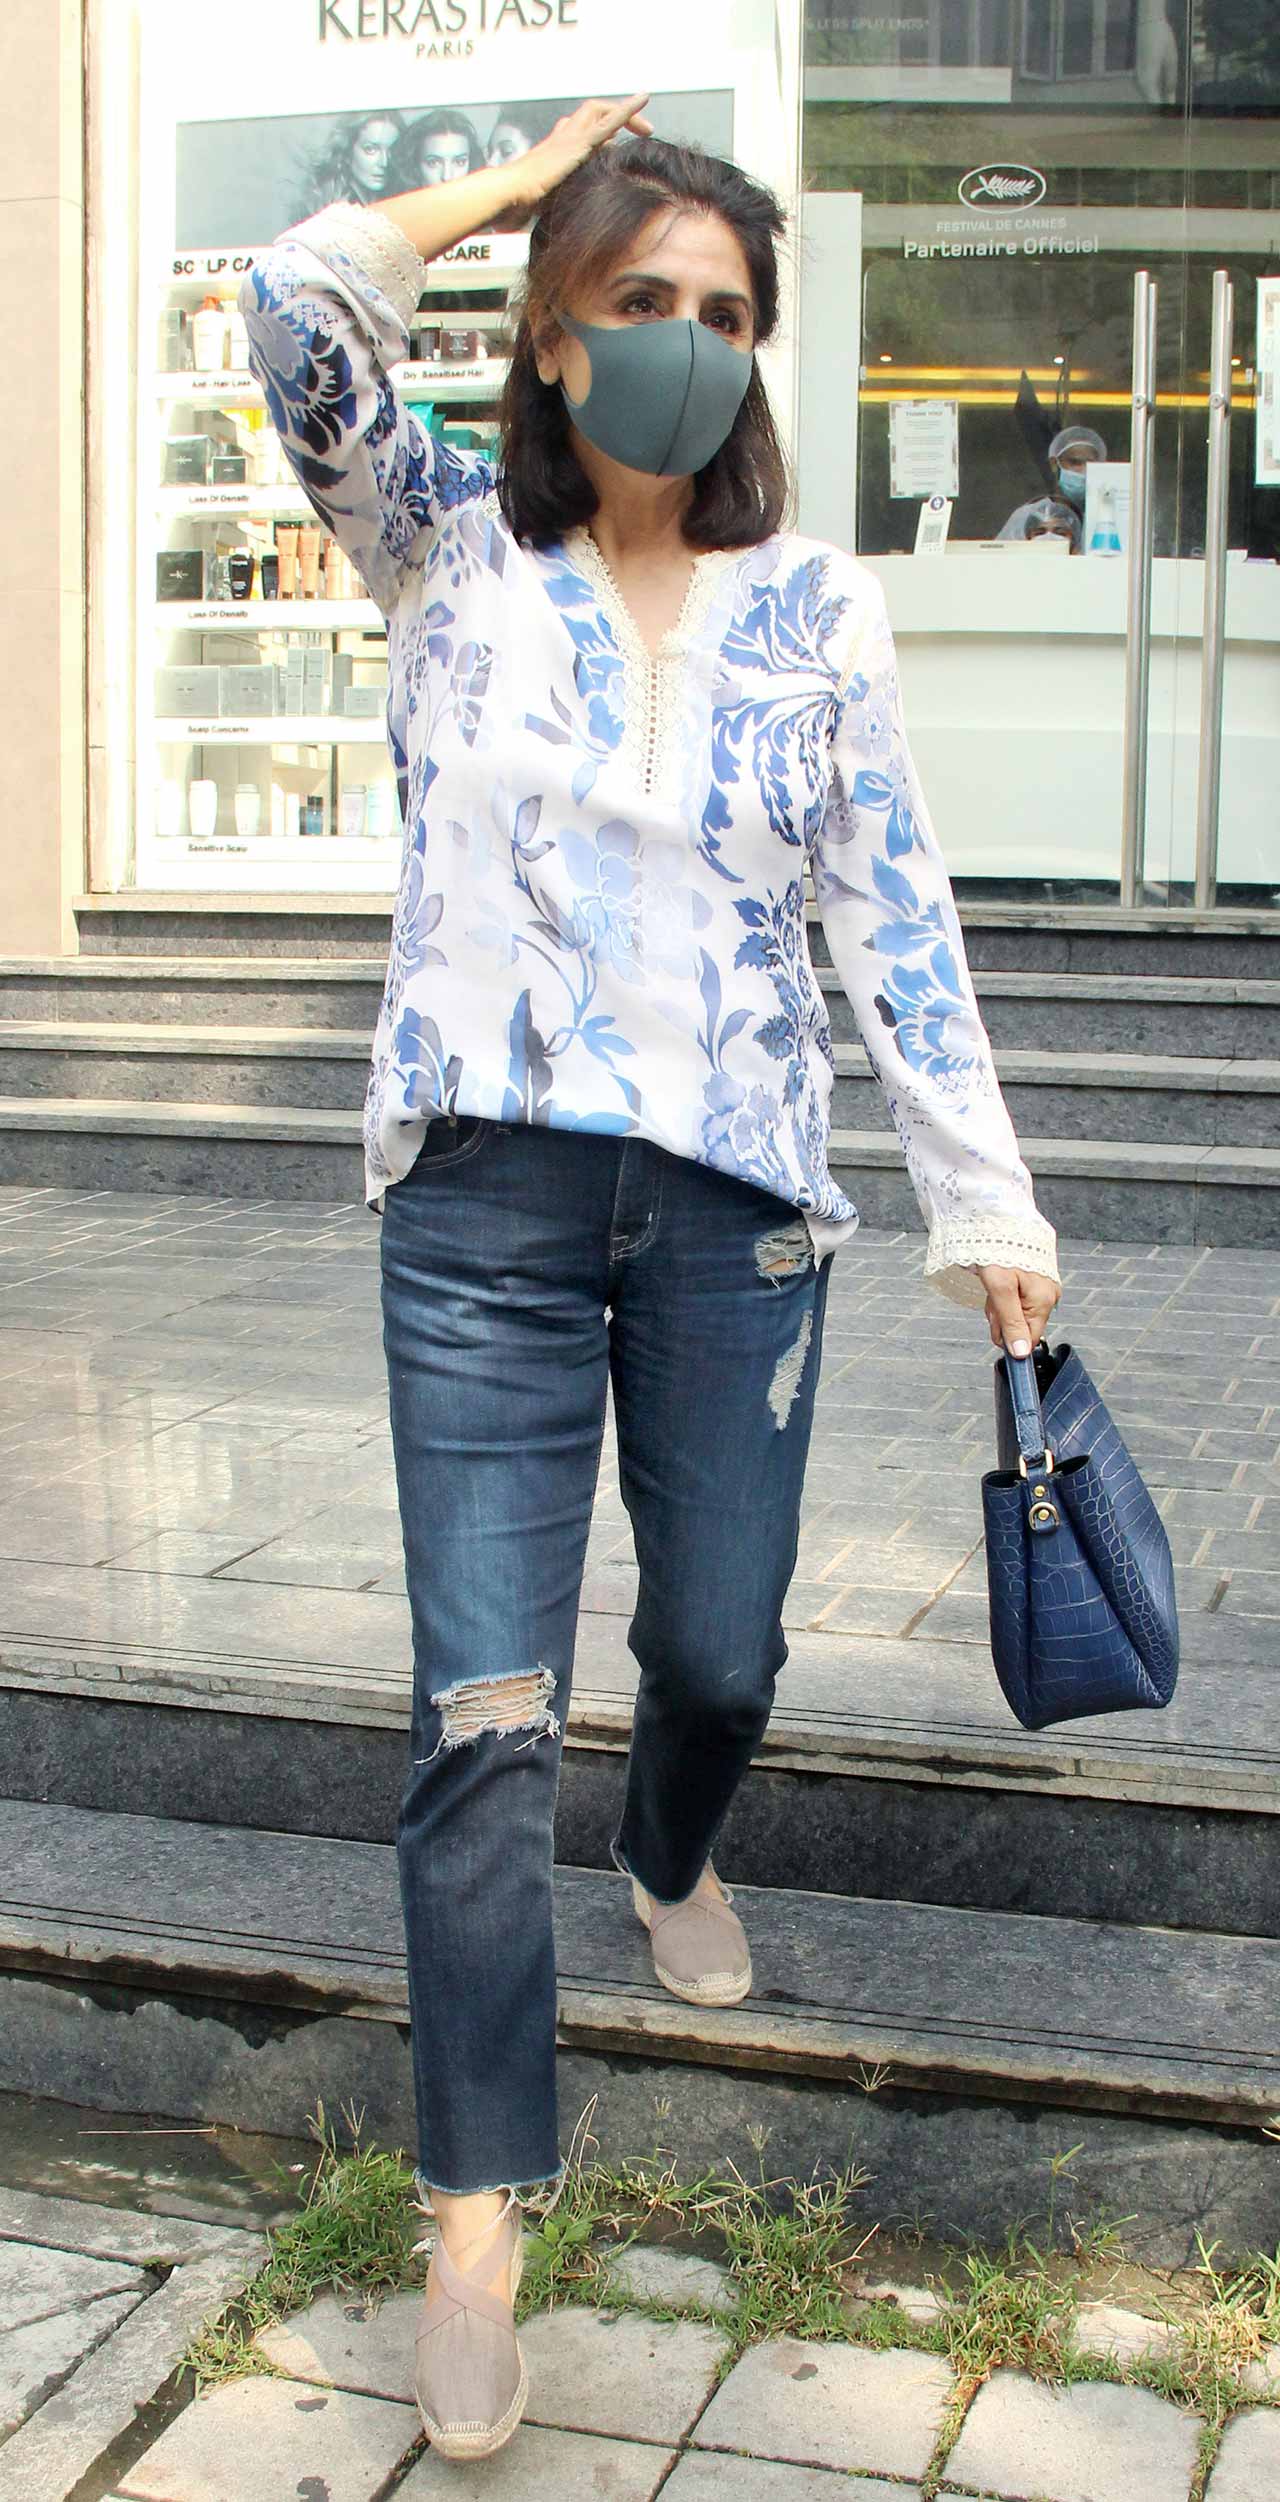 Neetu Kapoor was also spotted strolling the streets of the city. The actress was snapped wearing a casual top, paired with distress denim during the outing.